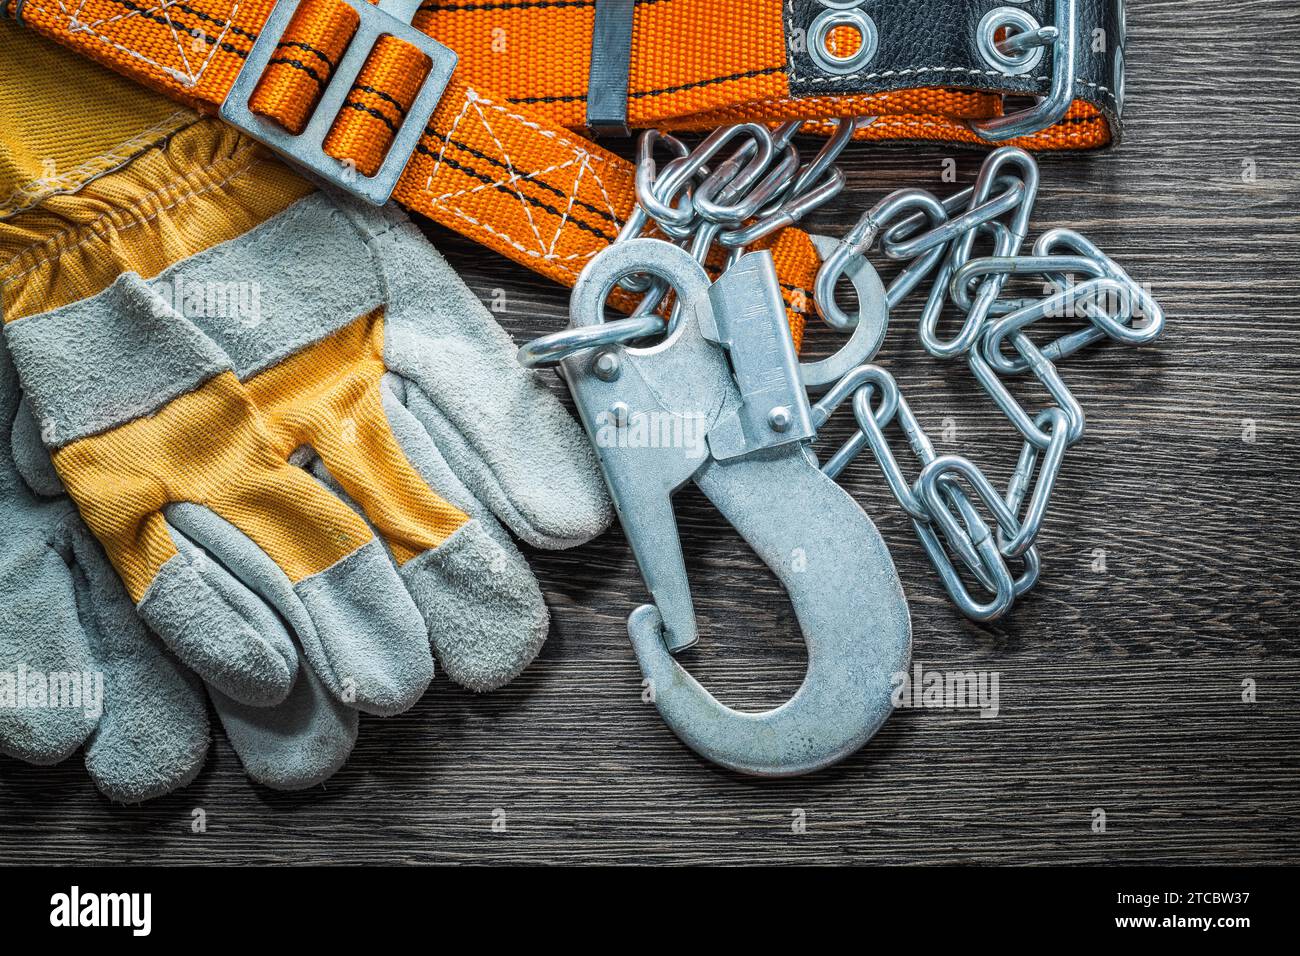 Composition of safety gloves Construction body belt on wooden board Stock Photo